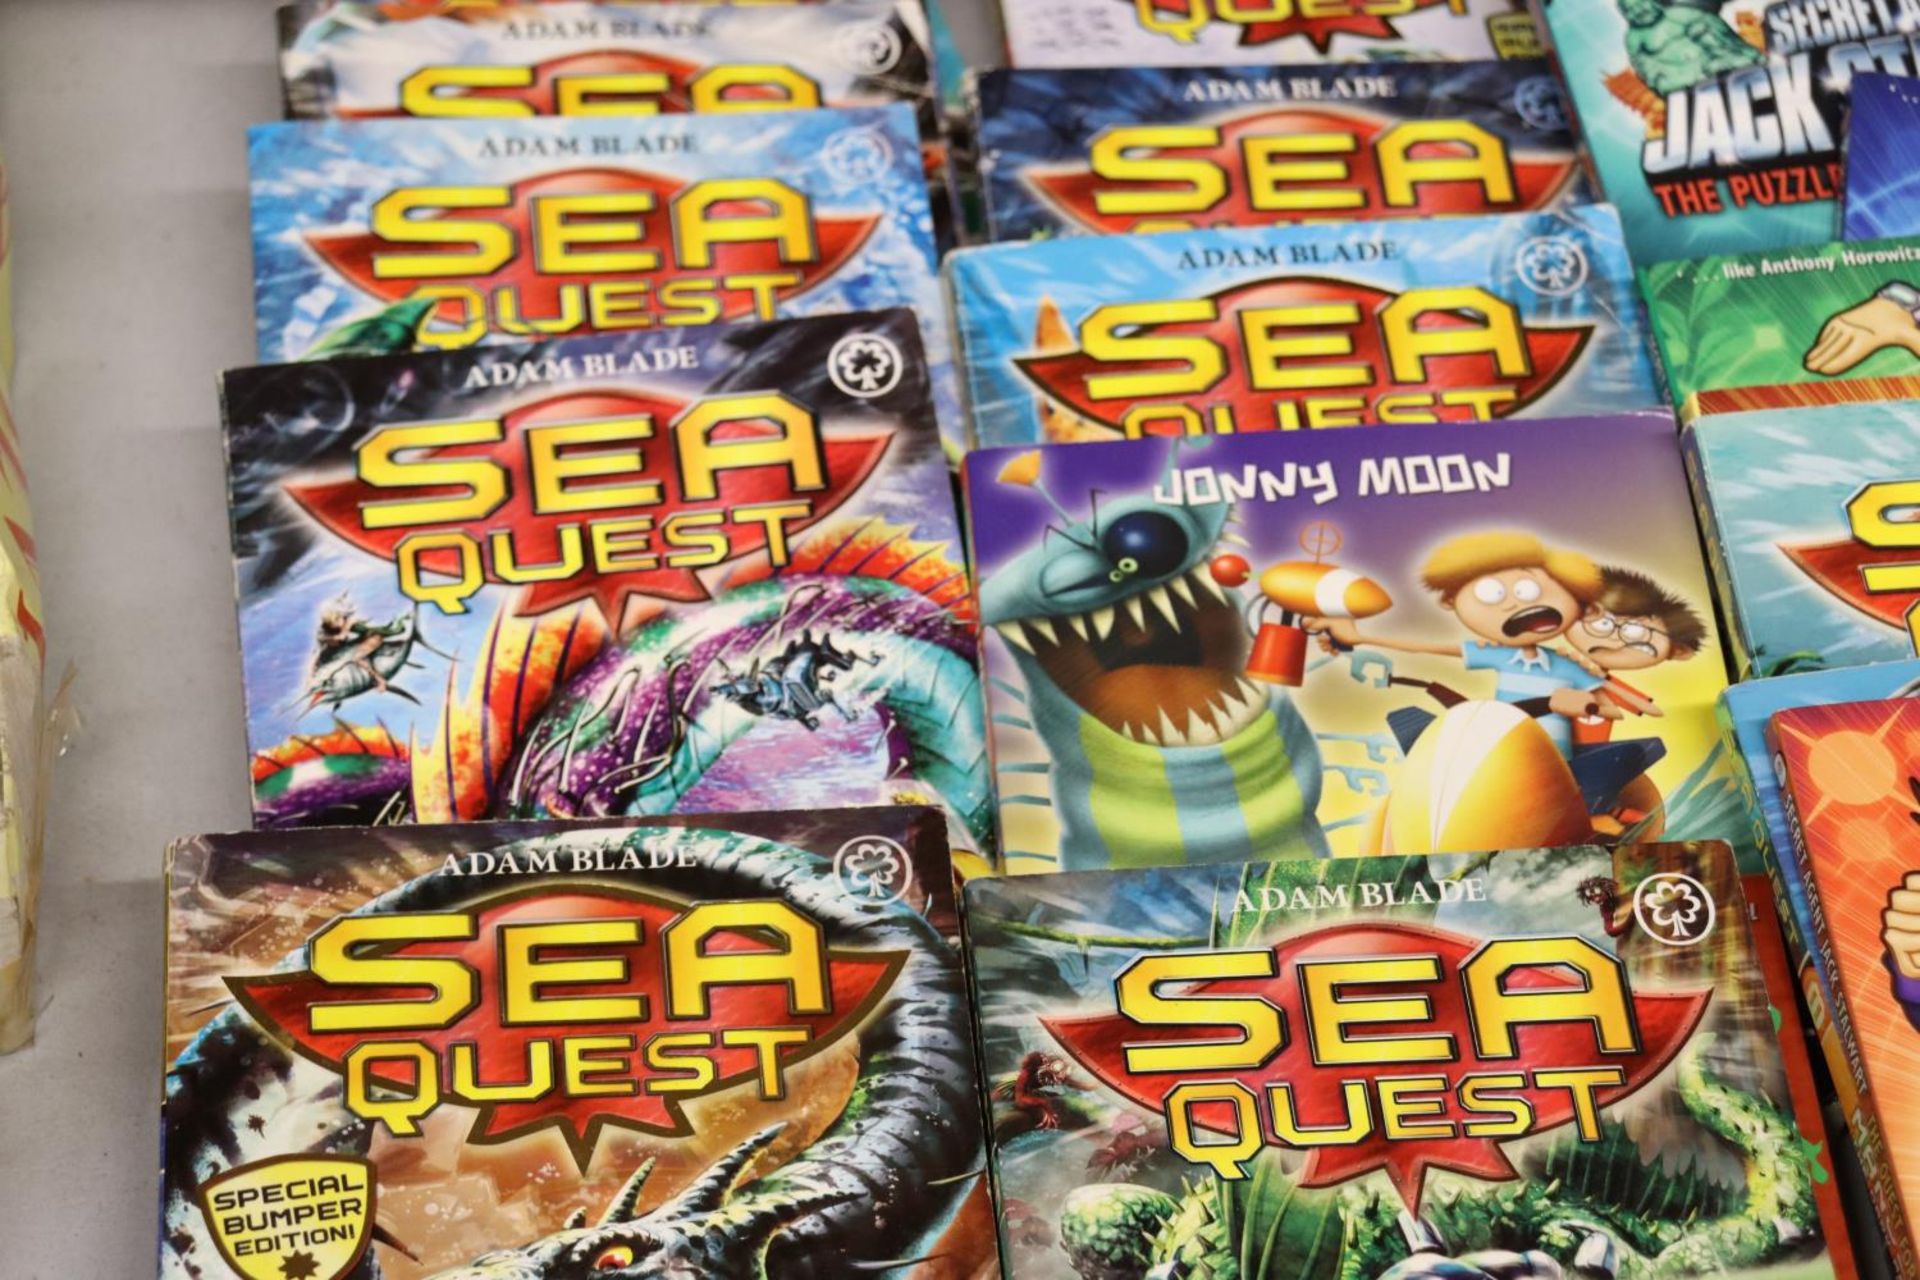 A LARGE COLLECTION OF CHILDREN'S BOOKS TO INCLUDE 'SEA QUEST' BY ADAM BLADE AND SECRET AGENT JACK - Image 4 of 5